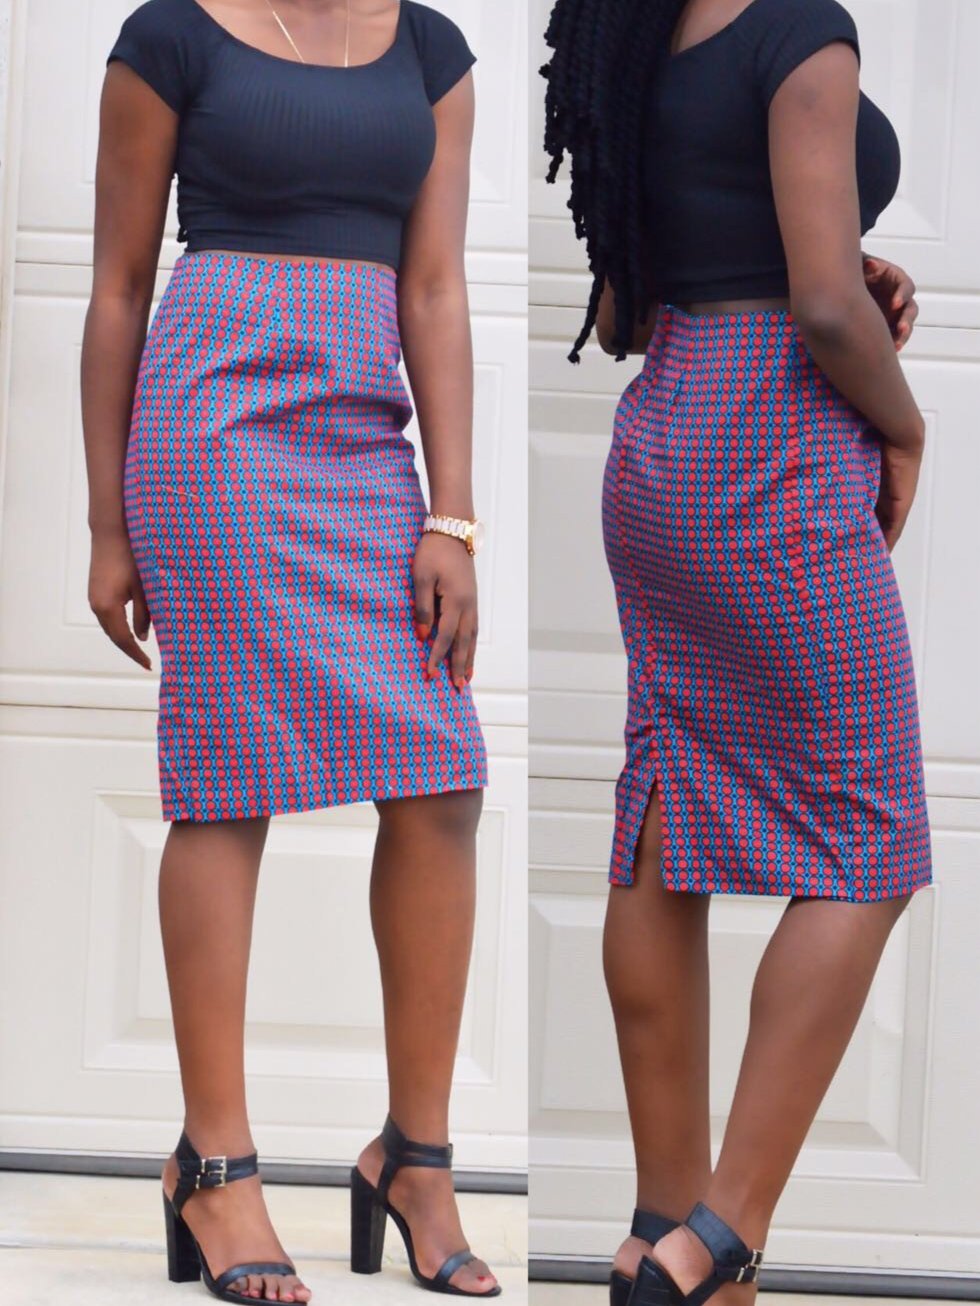 Ini pink and  blue pencil skirt